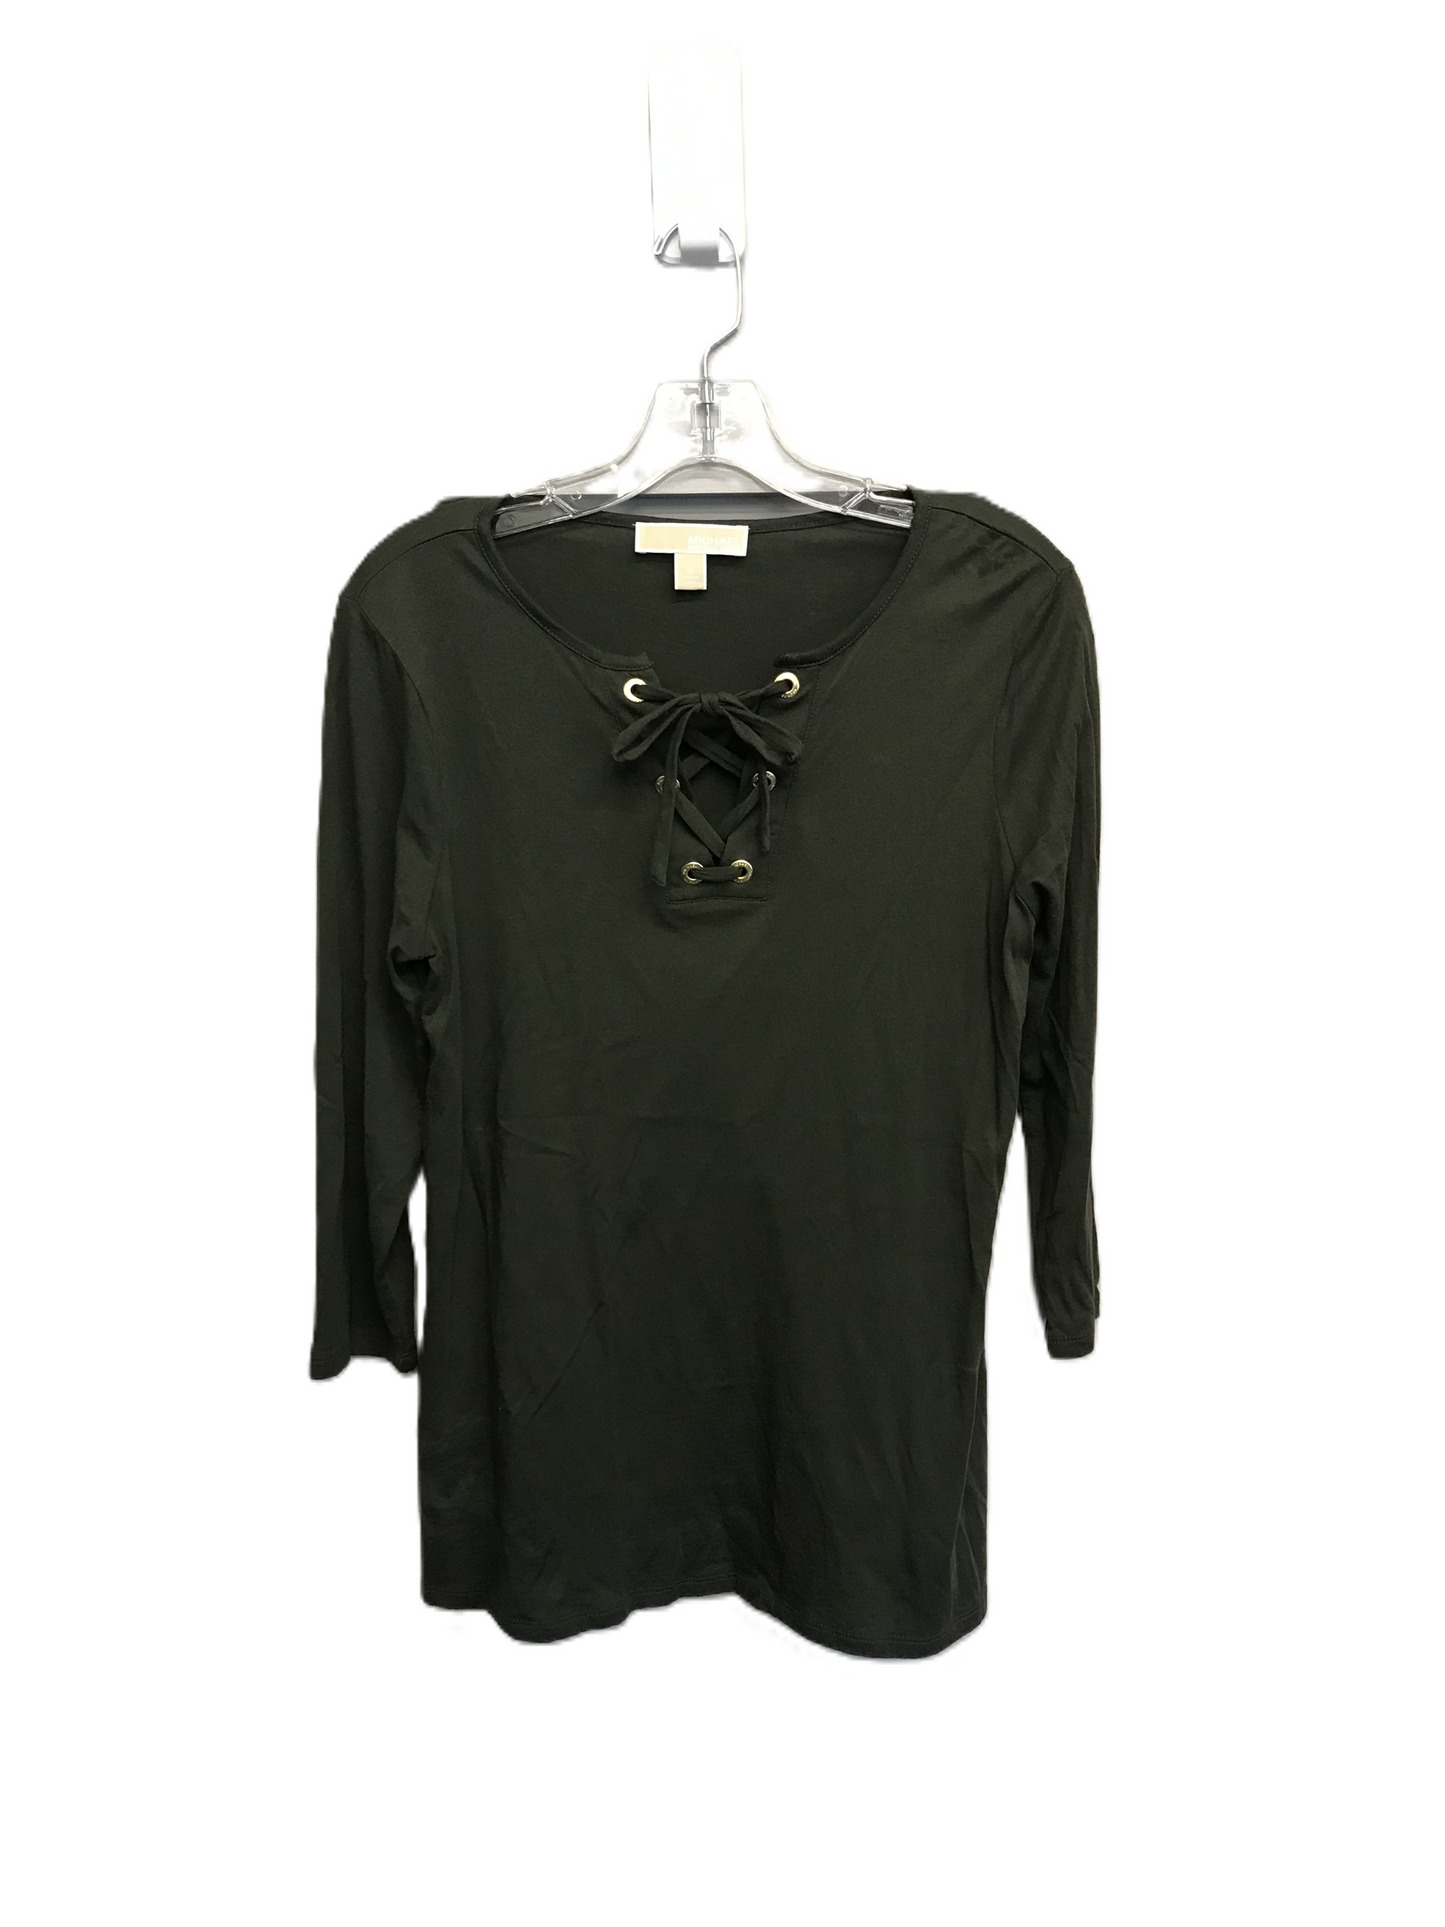 Green Top 3/4 Sleeve By Michael By Michael Kors, Size: M